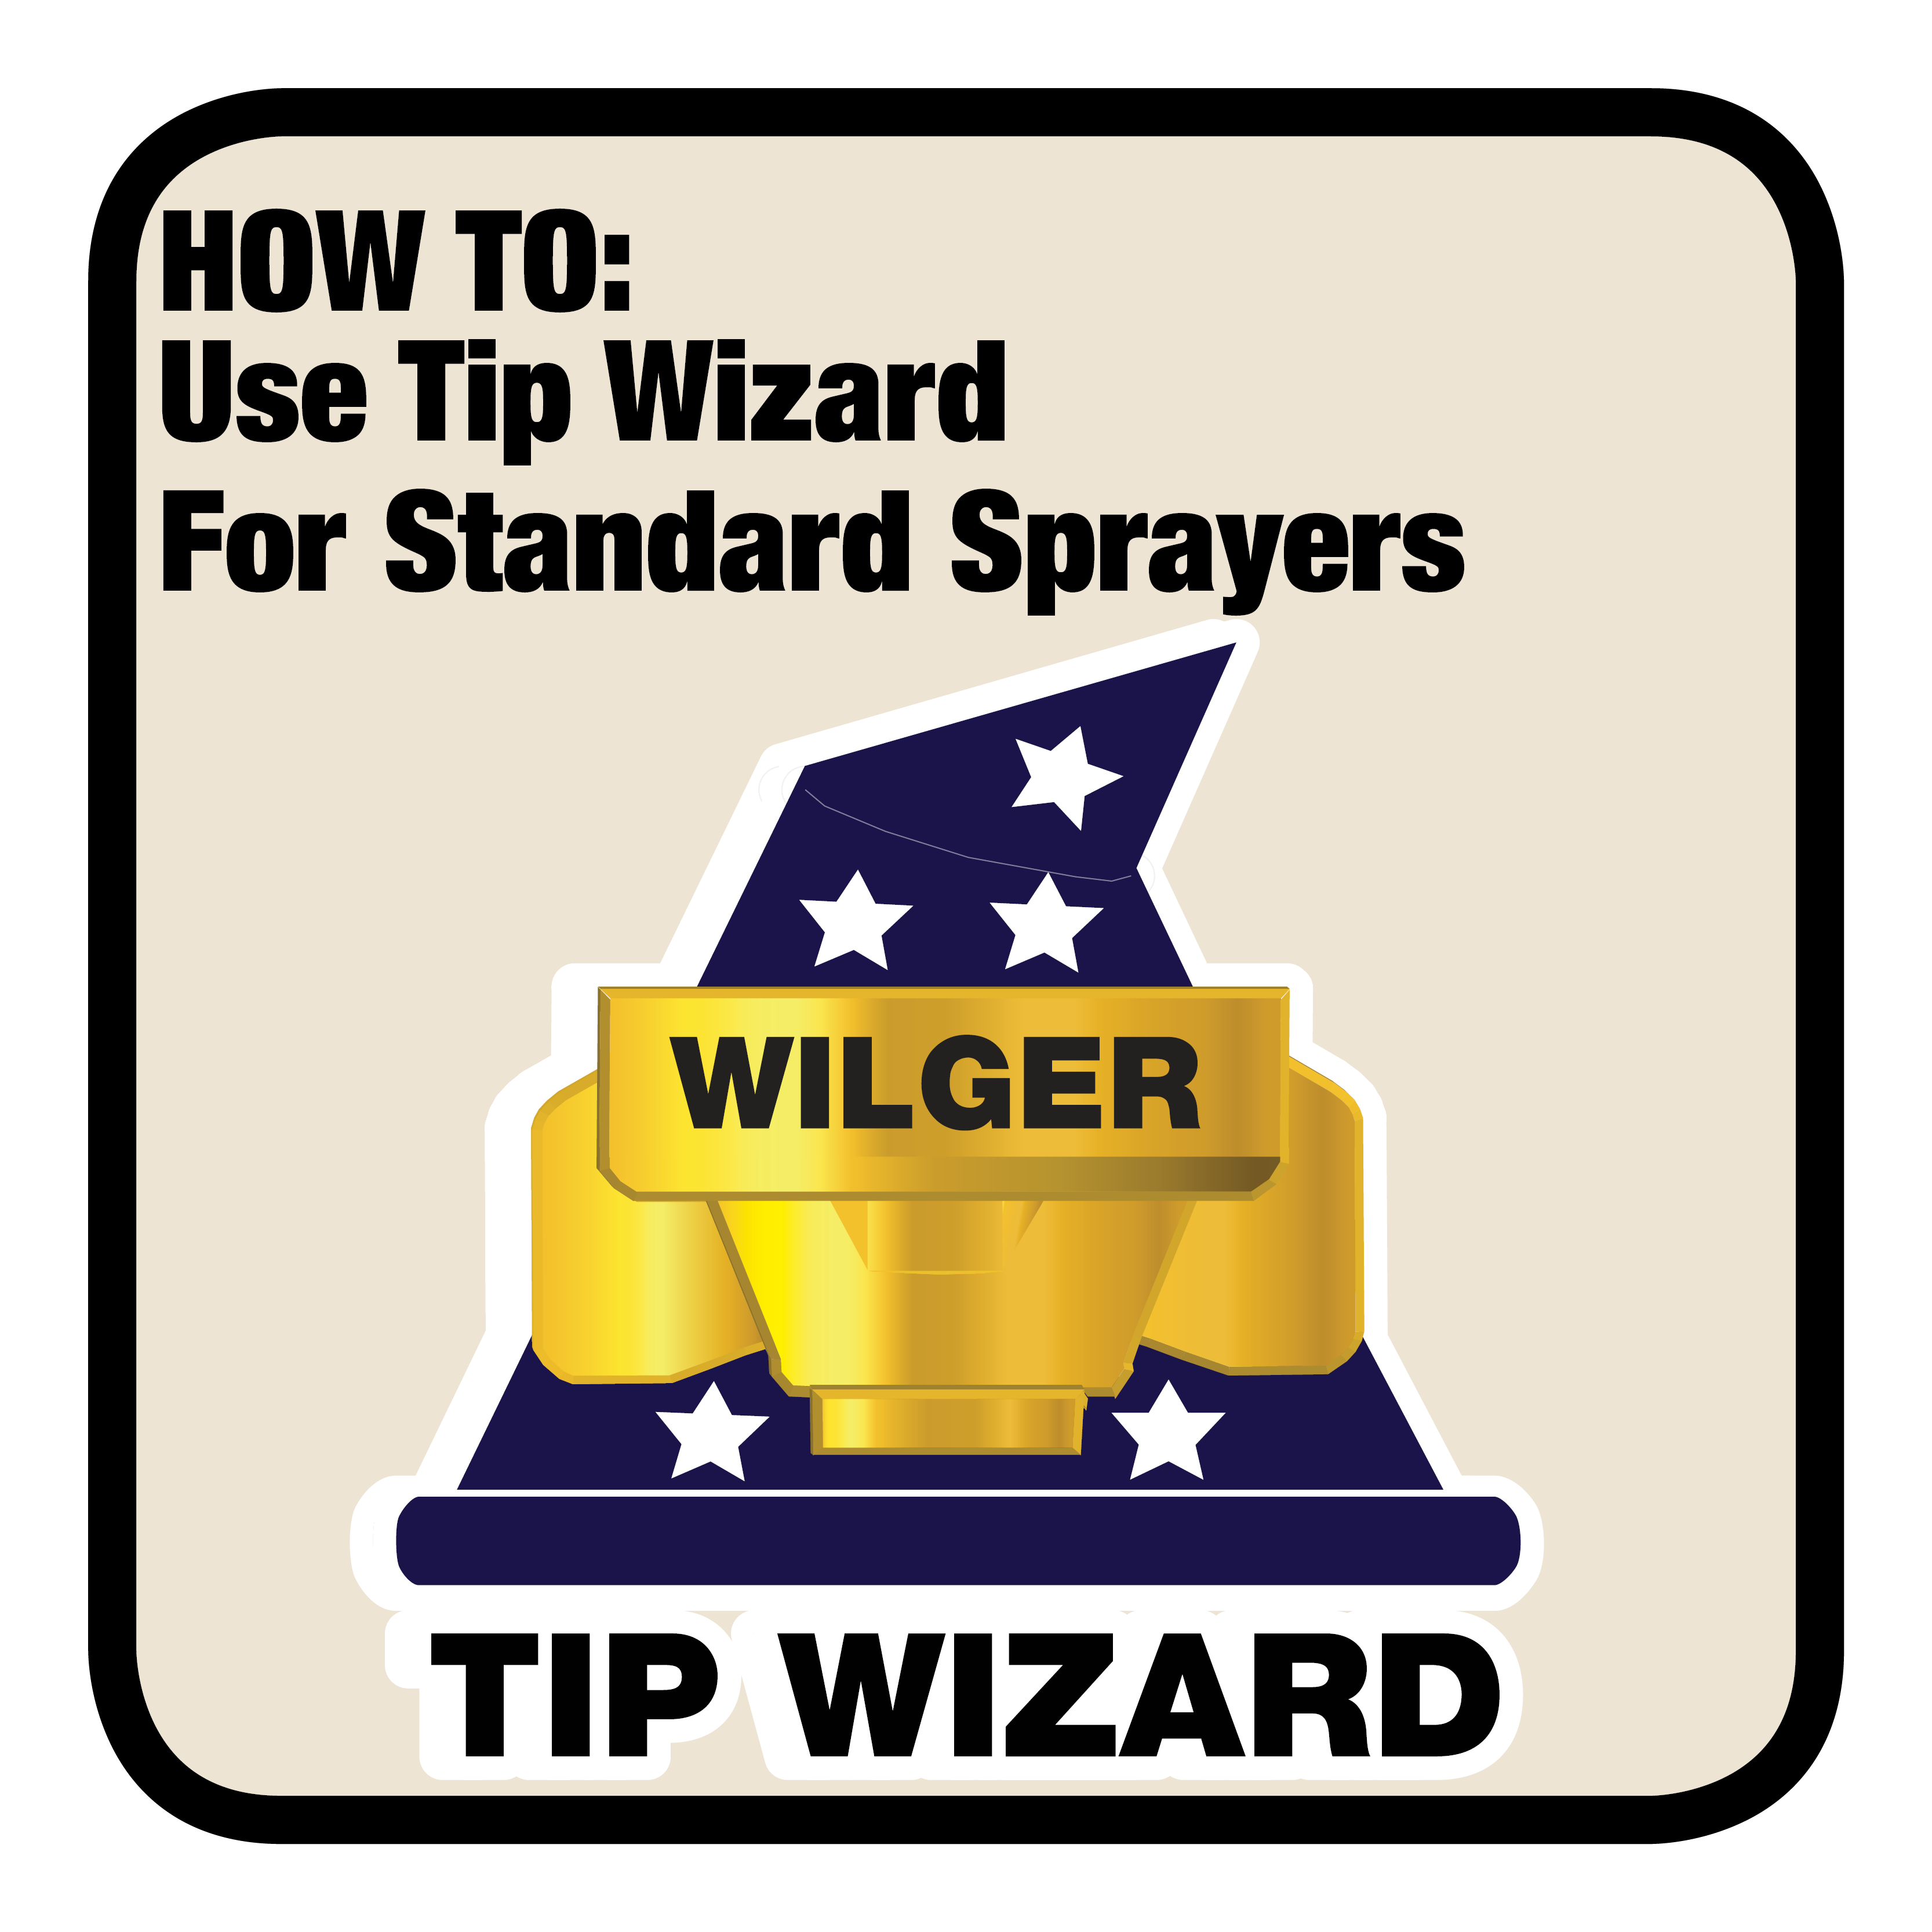 How to Use Tip Wizard for Standard Sprayers, such as speed + pressure sprayers, auto-rate controlled sprayers, etc.